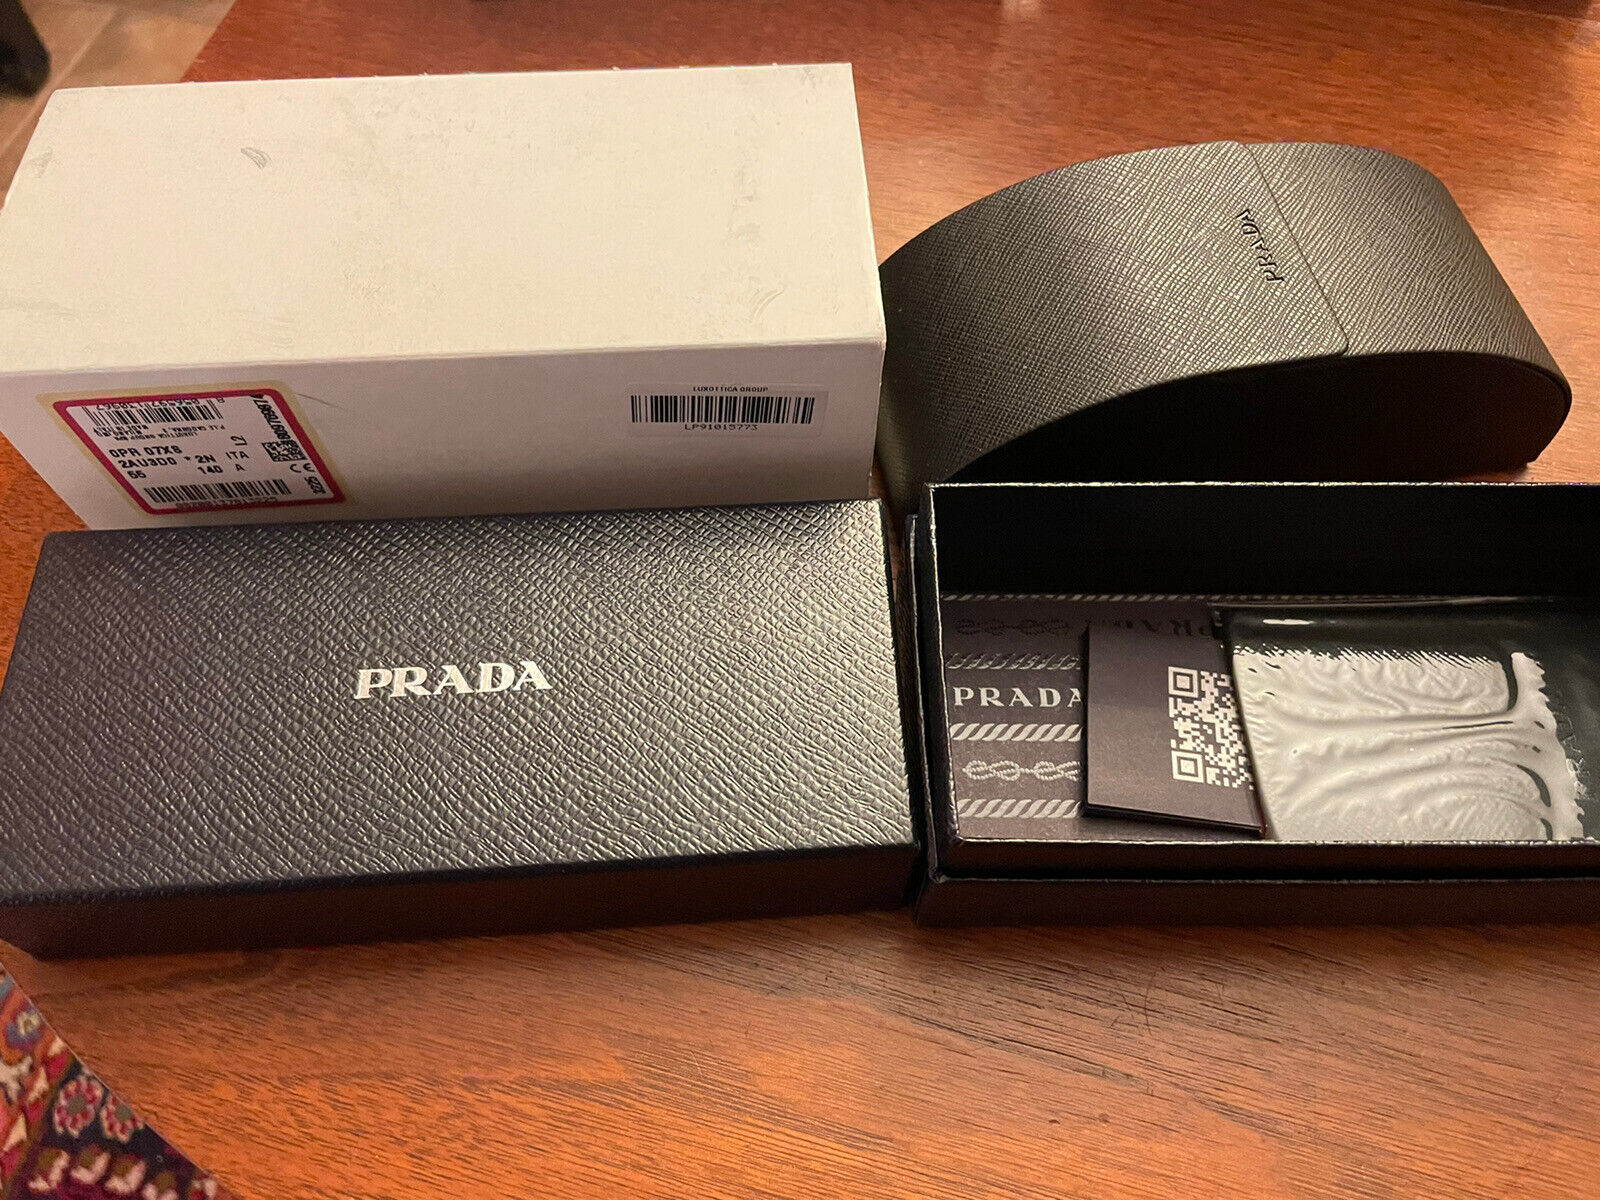 NEW PRADA  AUTHENTIC SUNGLASSES BLACK ROUND HARD CASE BOOKLET & CLOTH ONLY